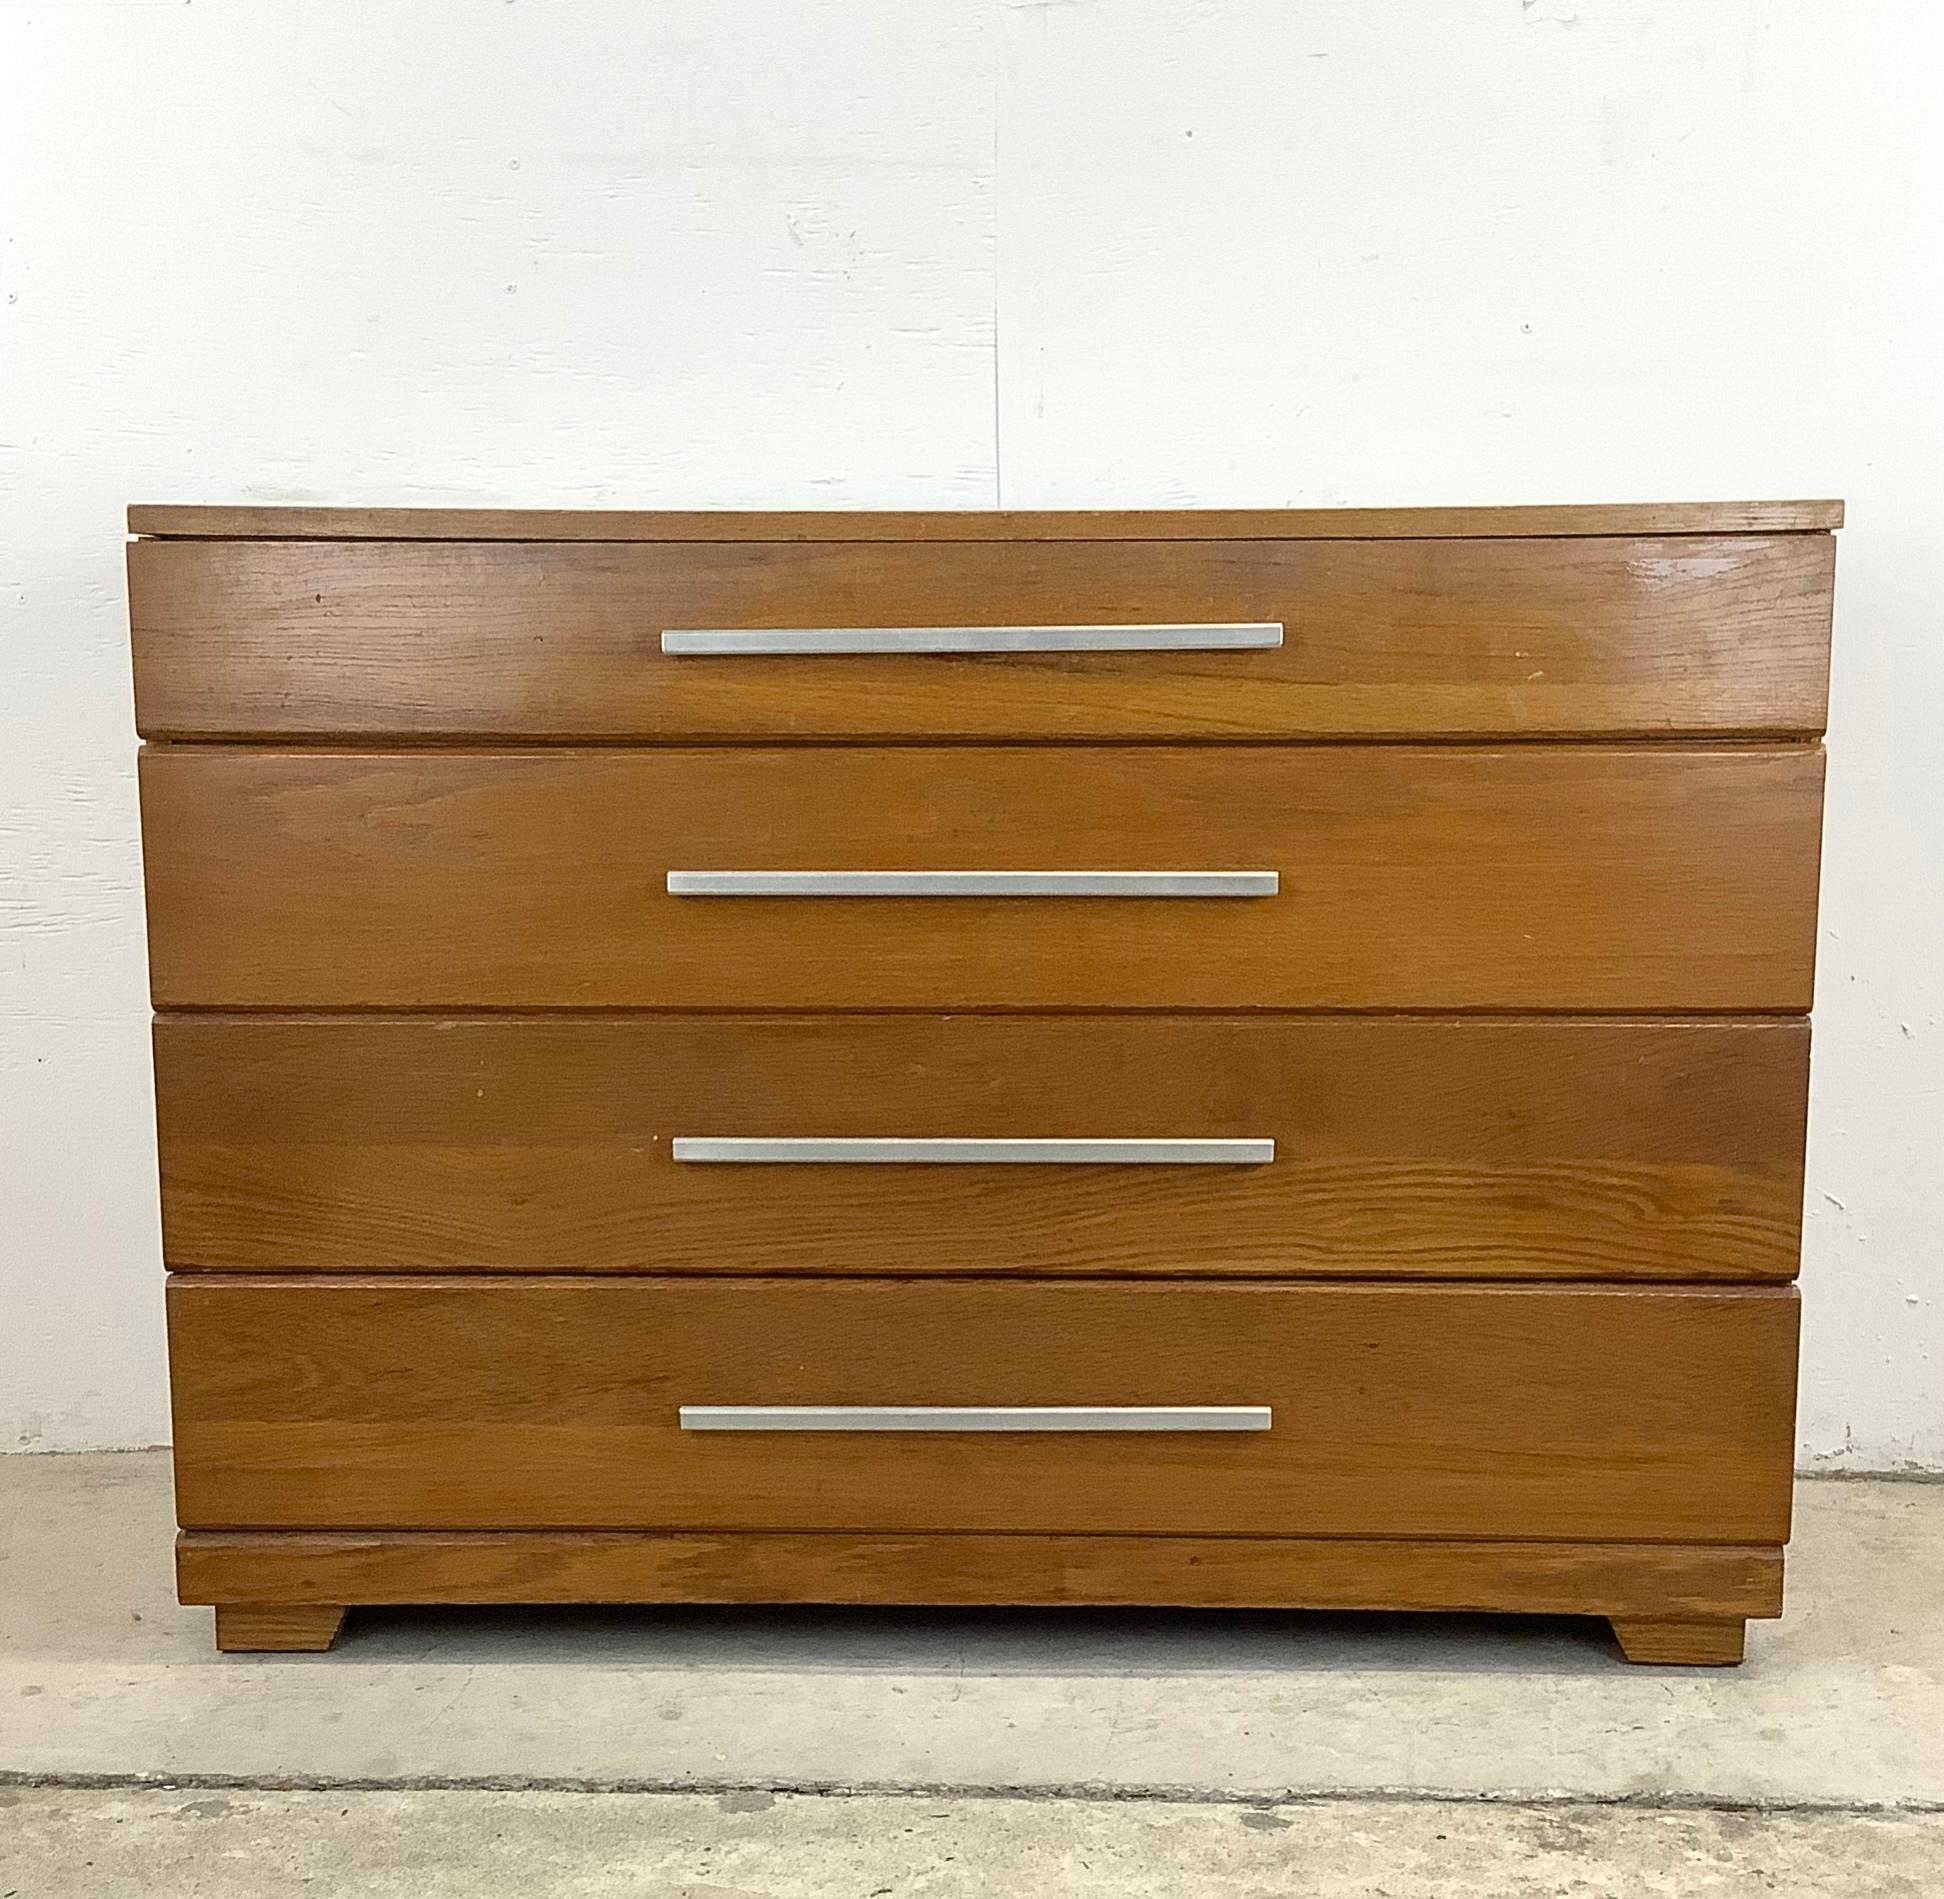 Immerse yourself in vintage sophistication with this Raymond Loewy designed Mid-Century 4-Drawer Dresser, manufactured by Mengel Furniture. This exquisite piece not only encapsulates the functionality of modern design but also carries the legacy of